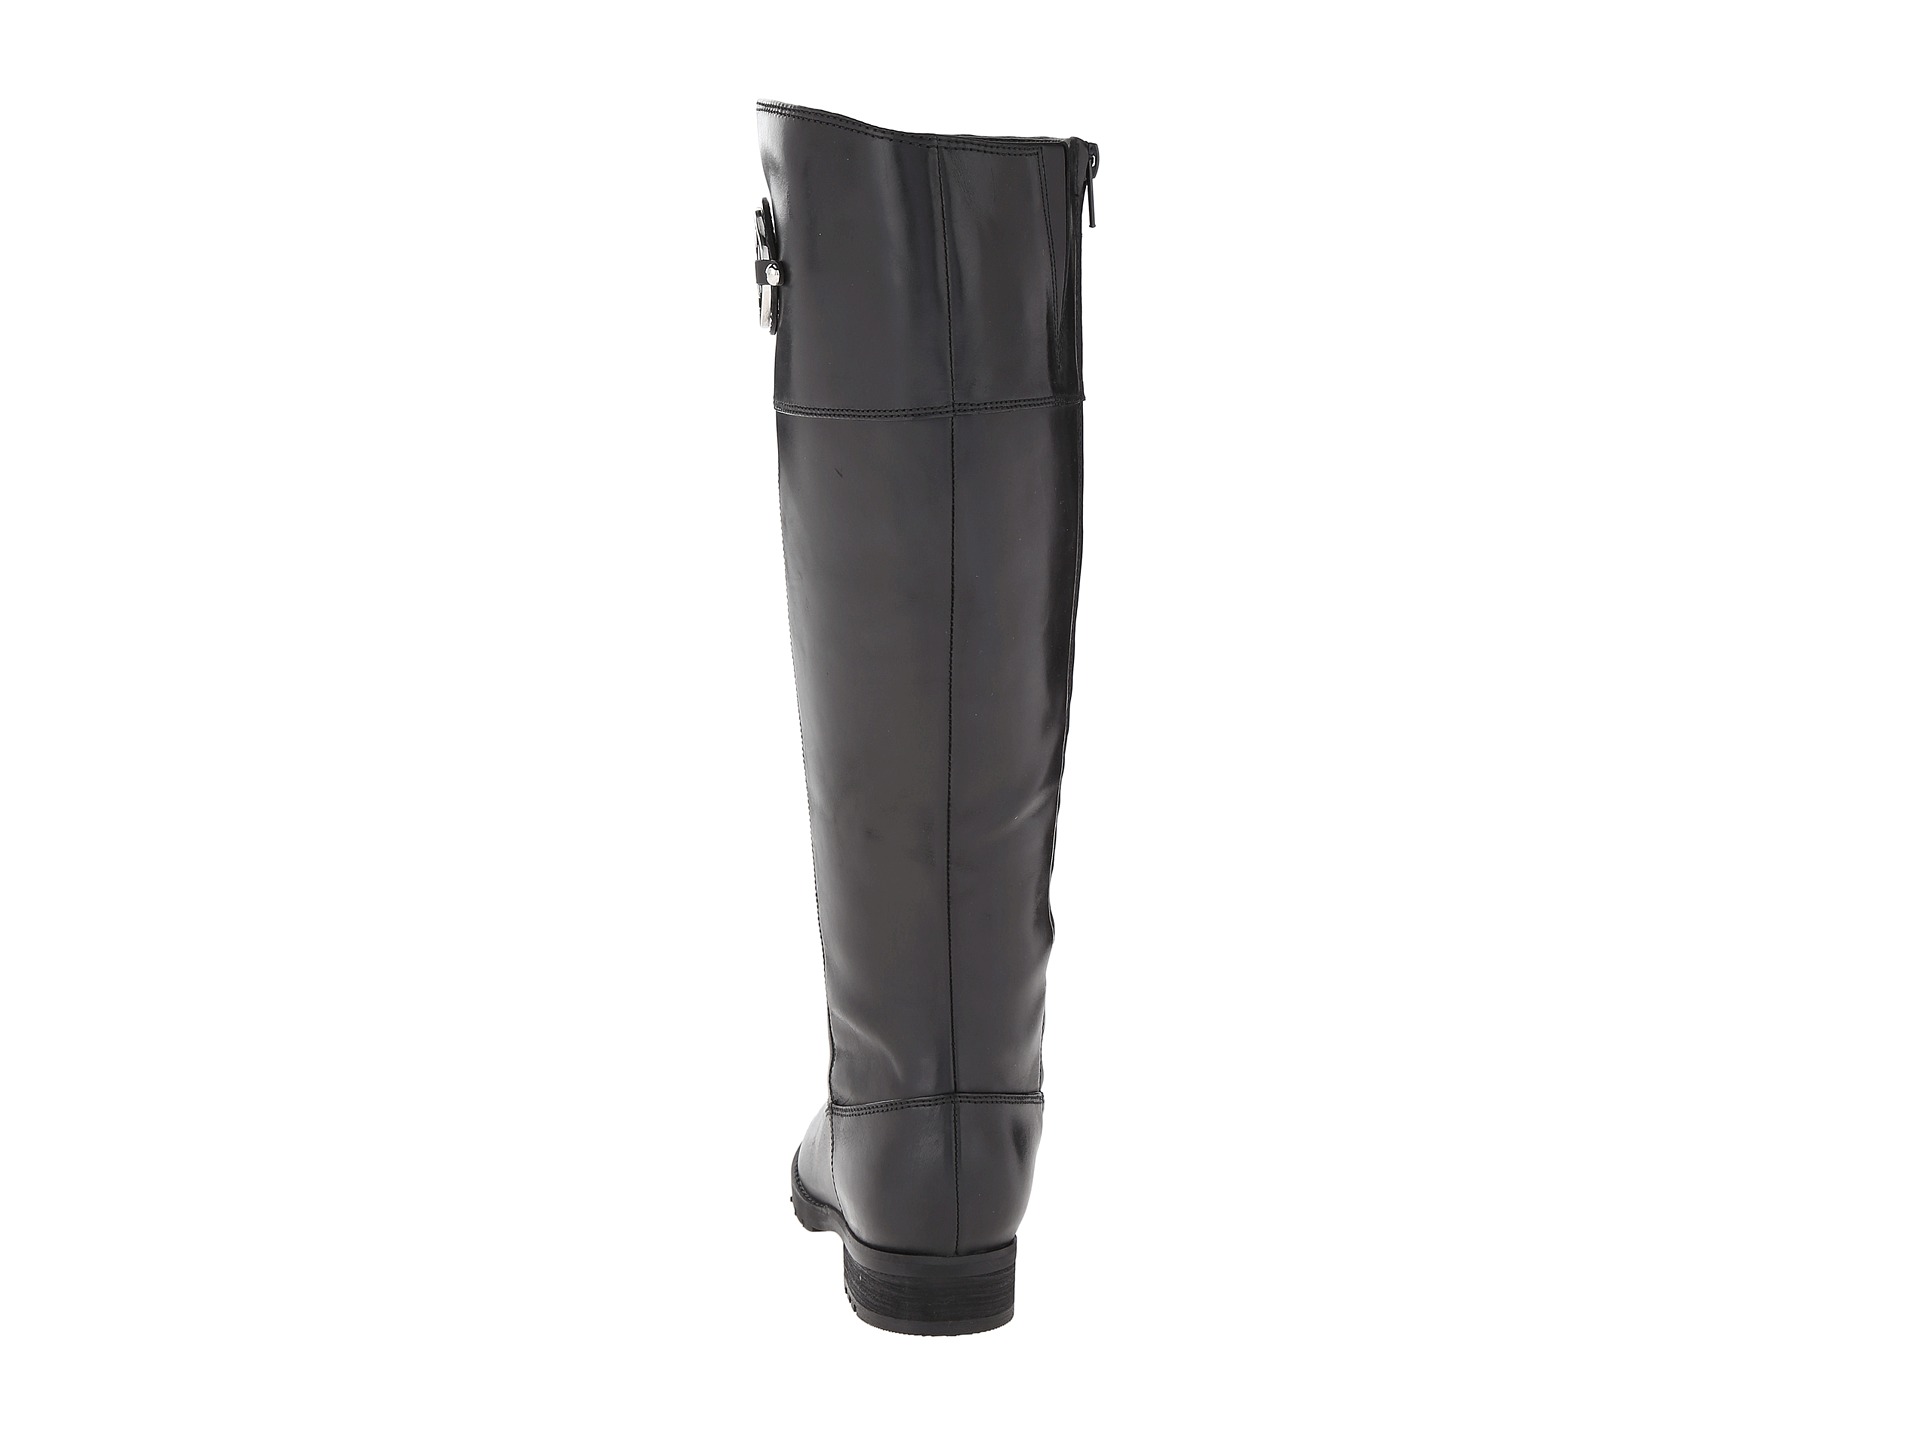 No results for rockport tristina crest riding boot - Search Zappos